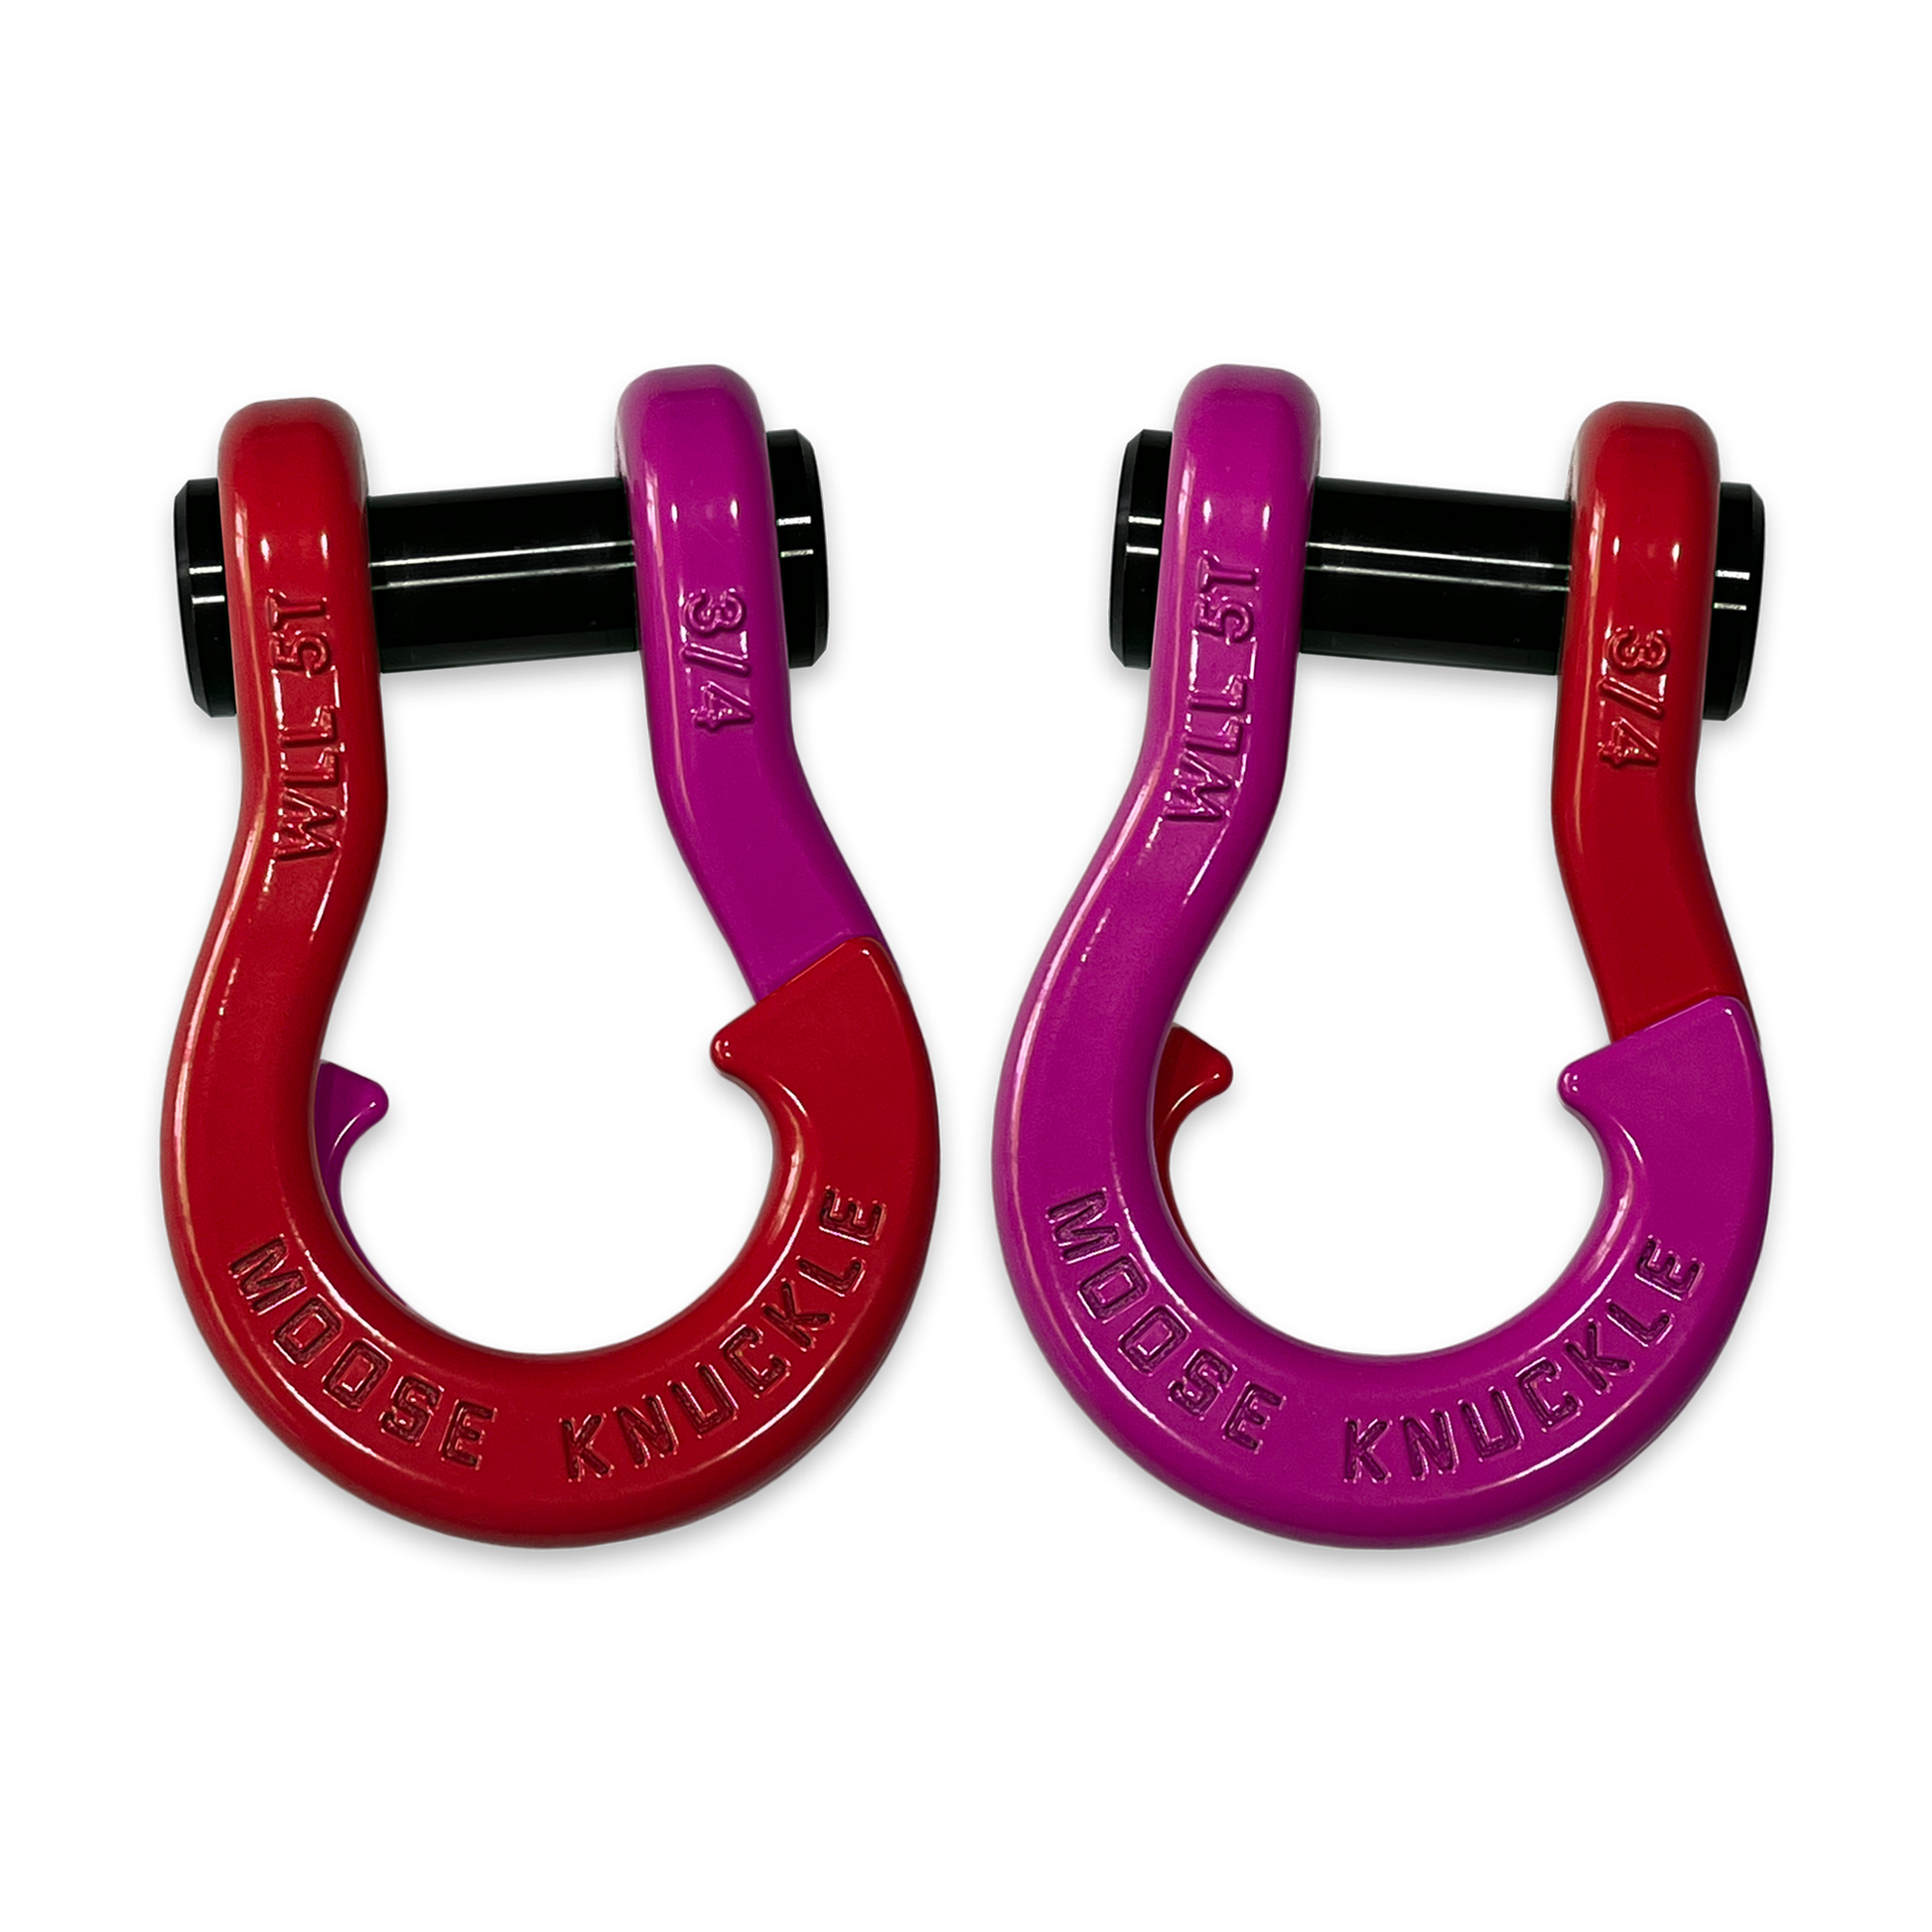 Moose Knuckle's Jowl Recovery Split Shackle 3/4 in Flame Red and POGO Pink Combo